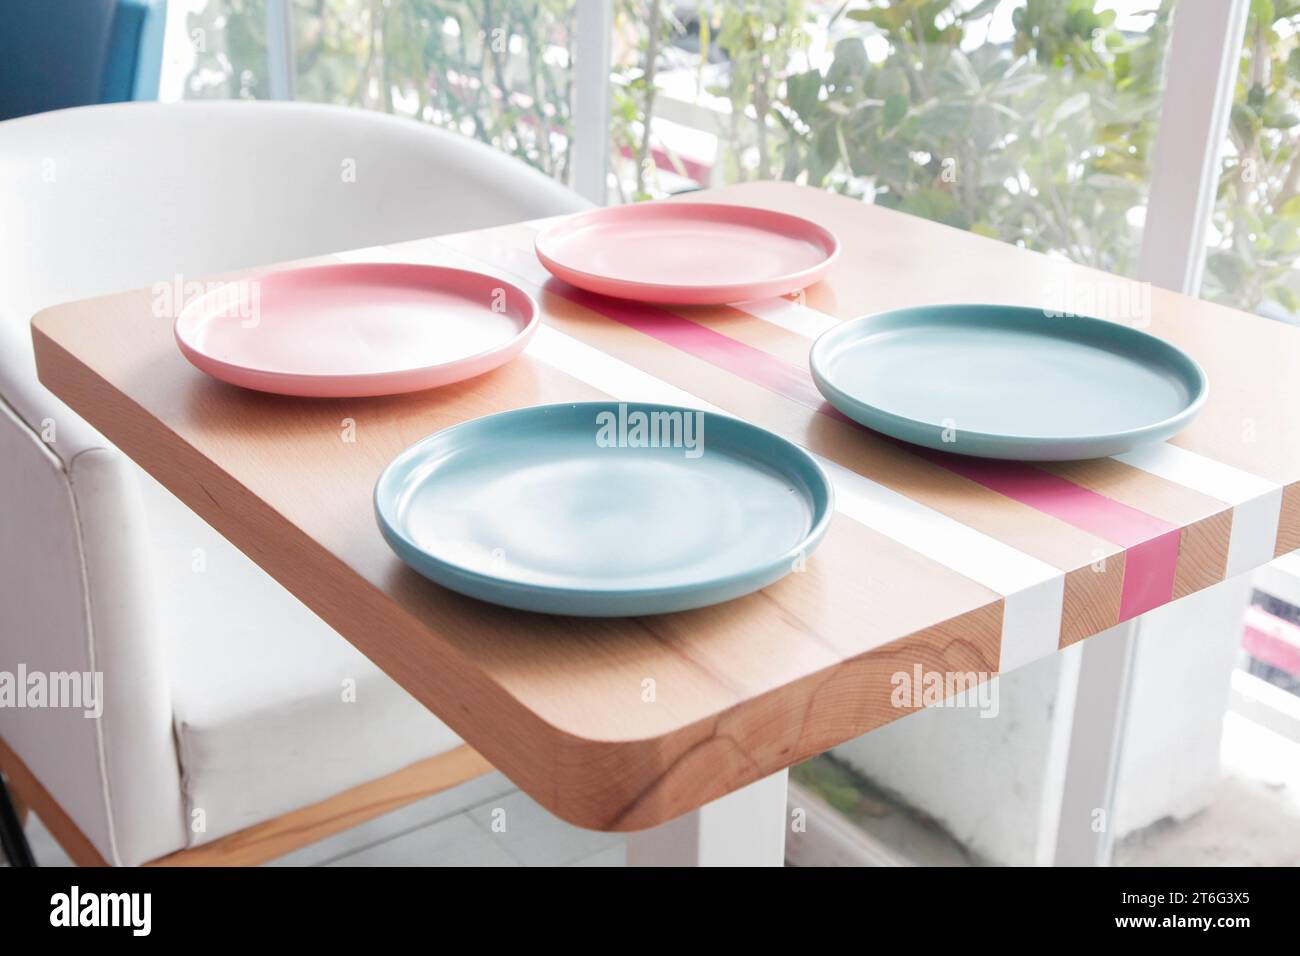 Colourful empty plates on a wooden table at a coffee shop. Stock Photo